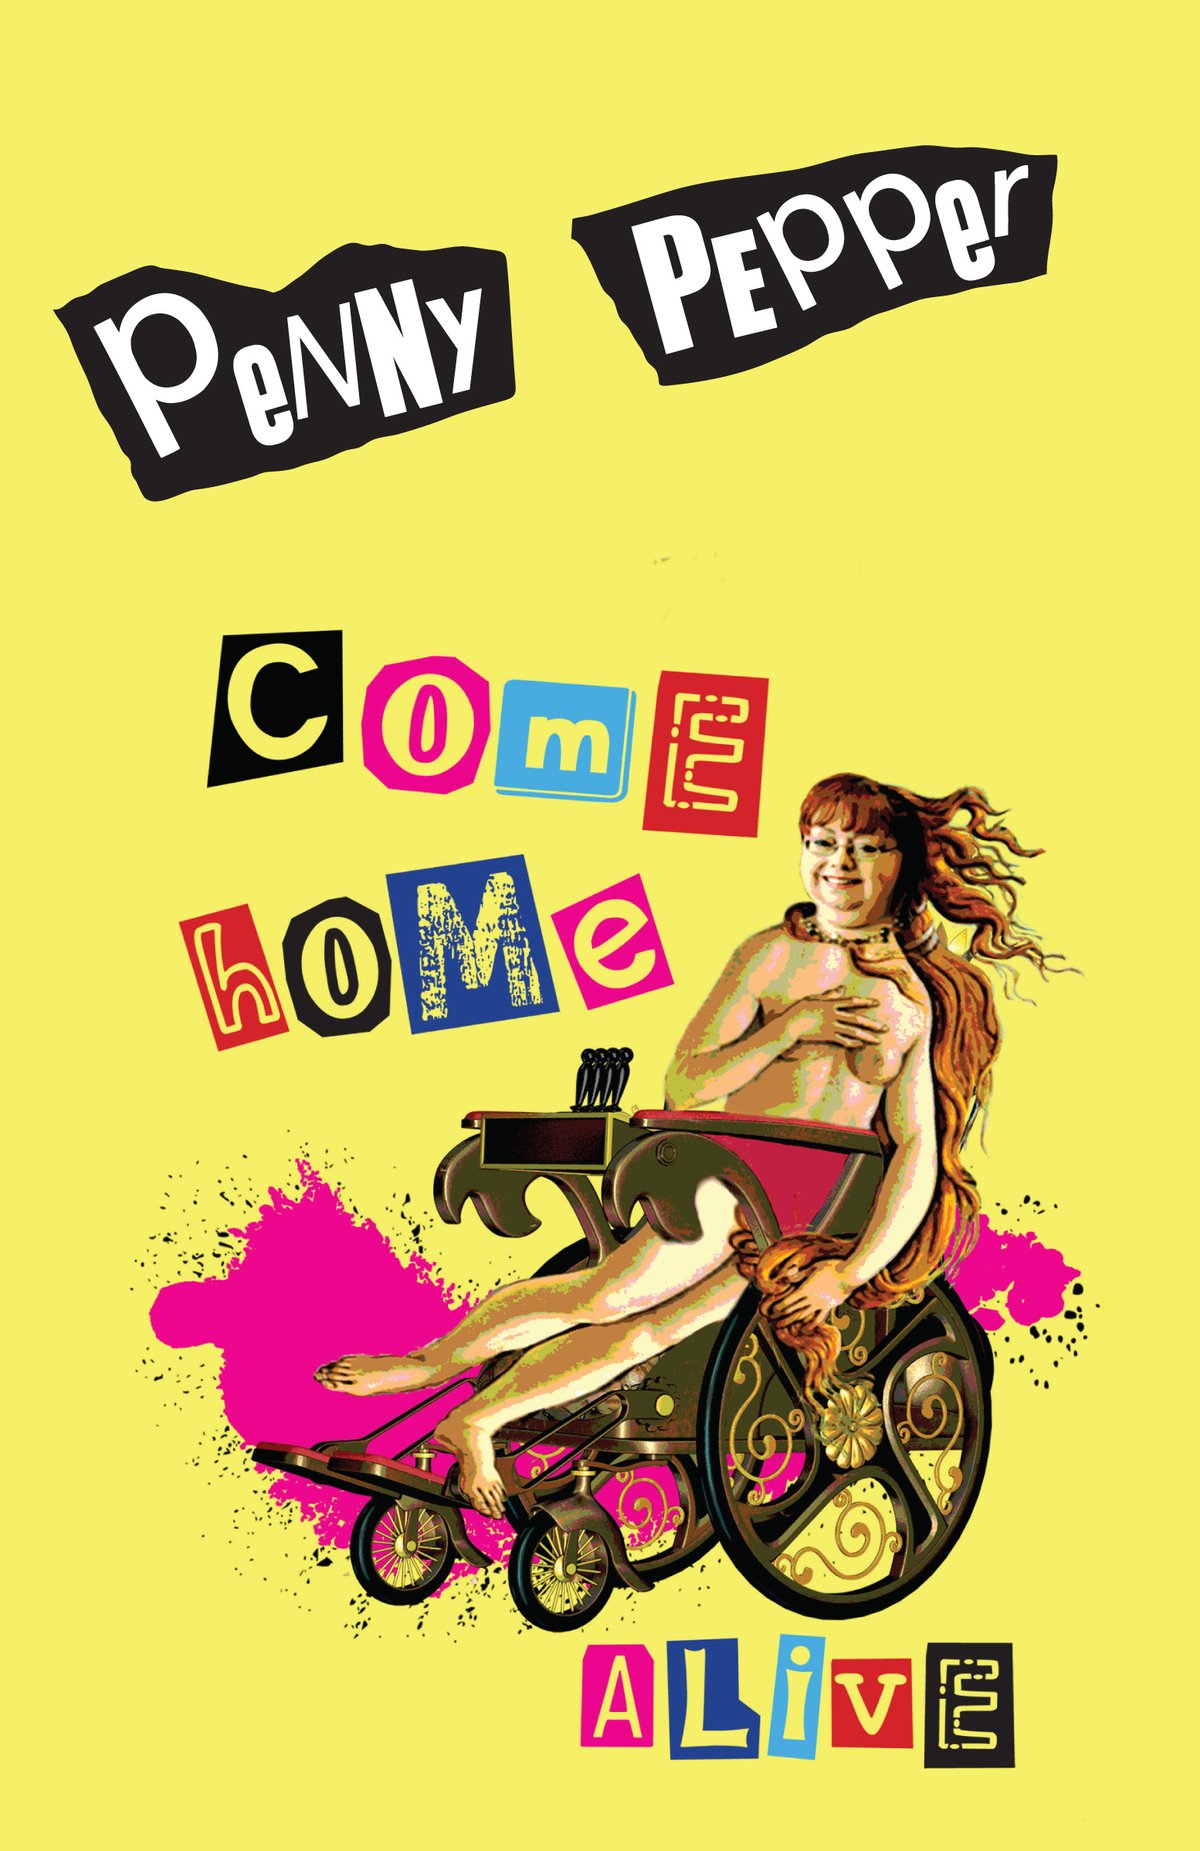 Image of Come Home Alive by Penny Pepper